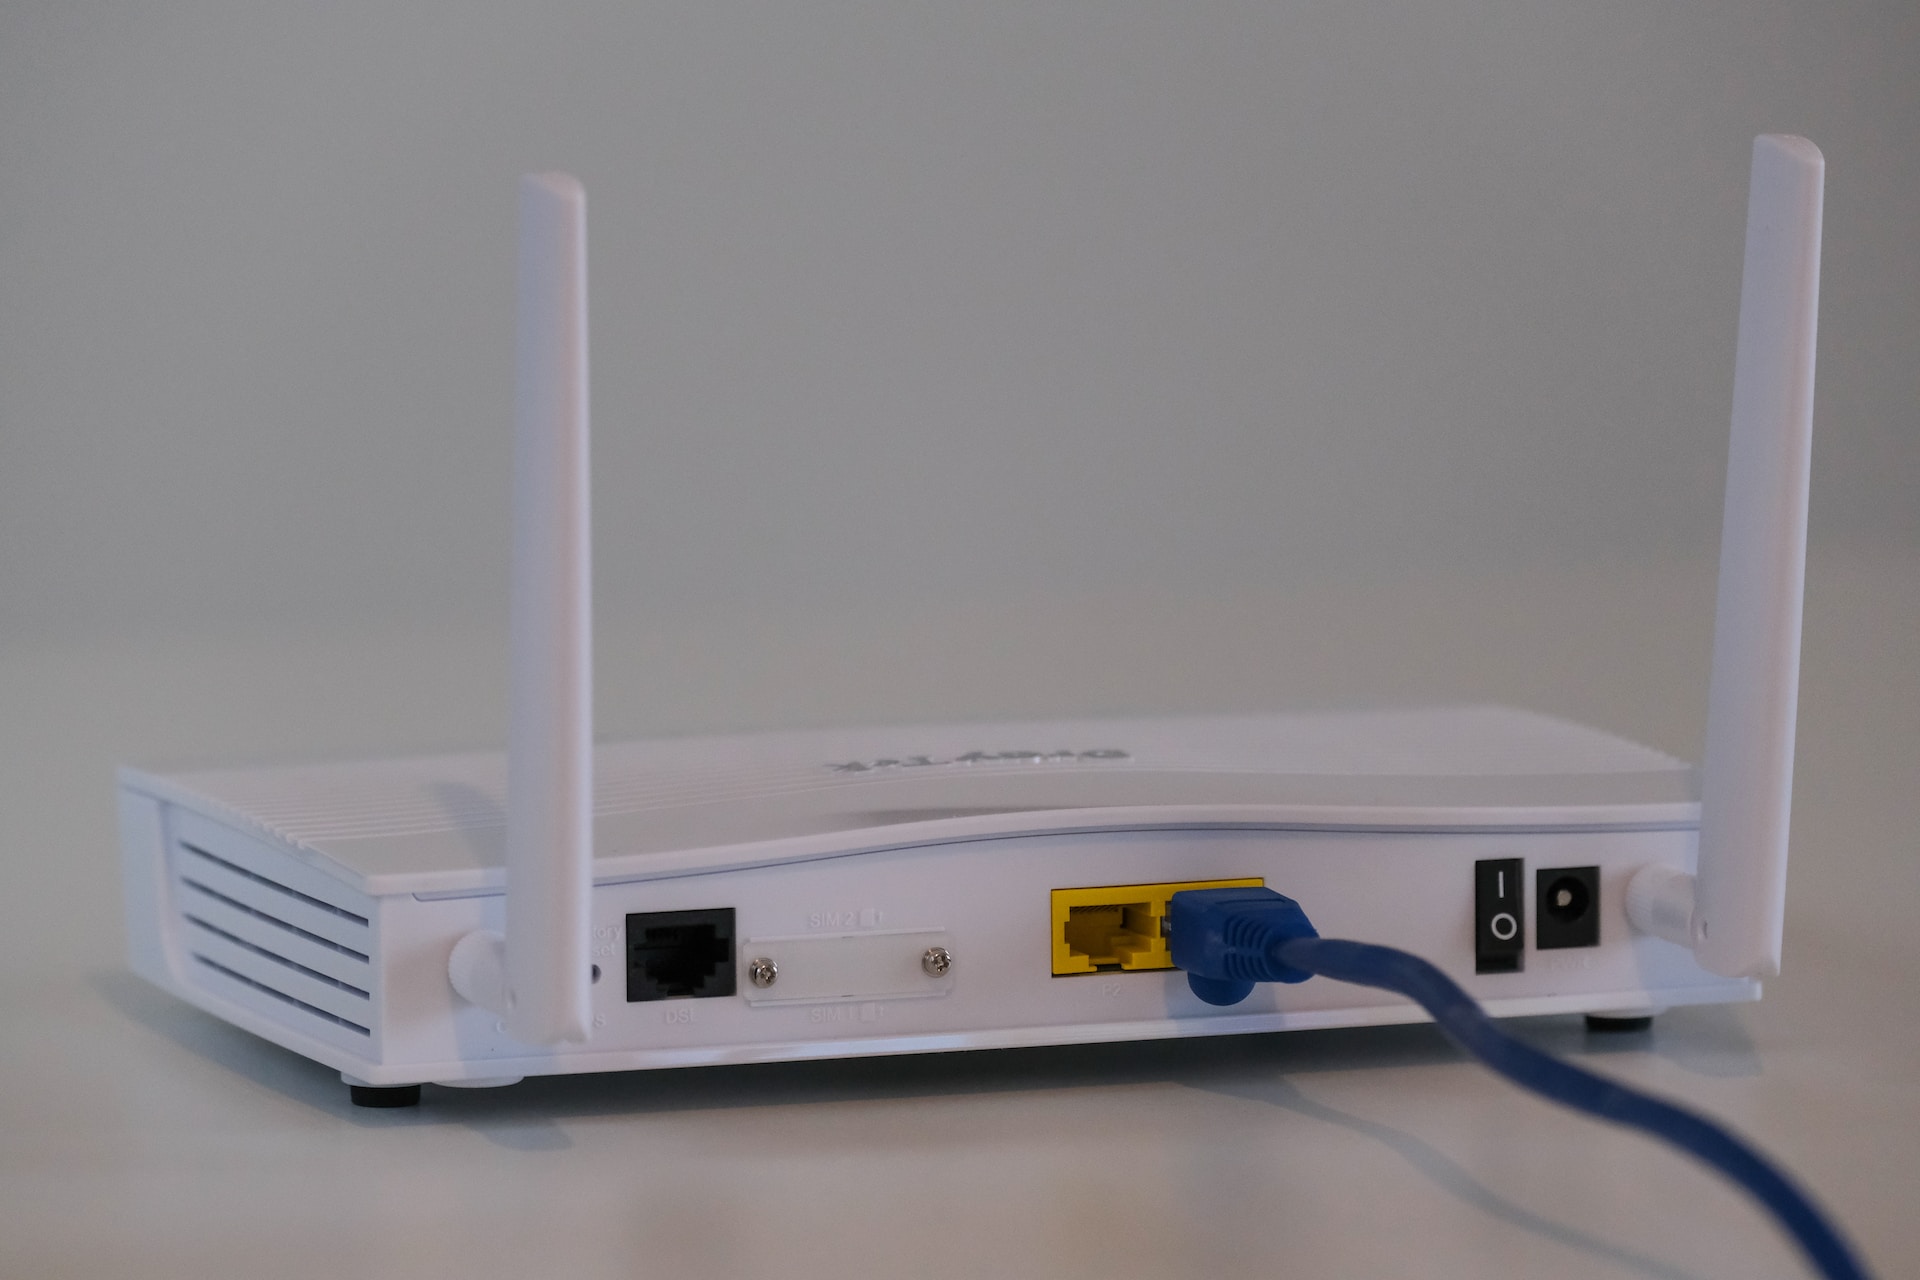 How To Connect A Router To A Modem